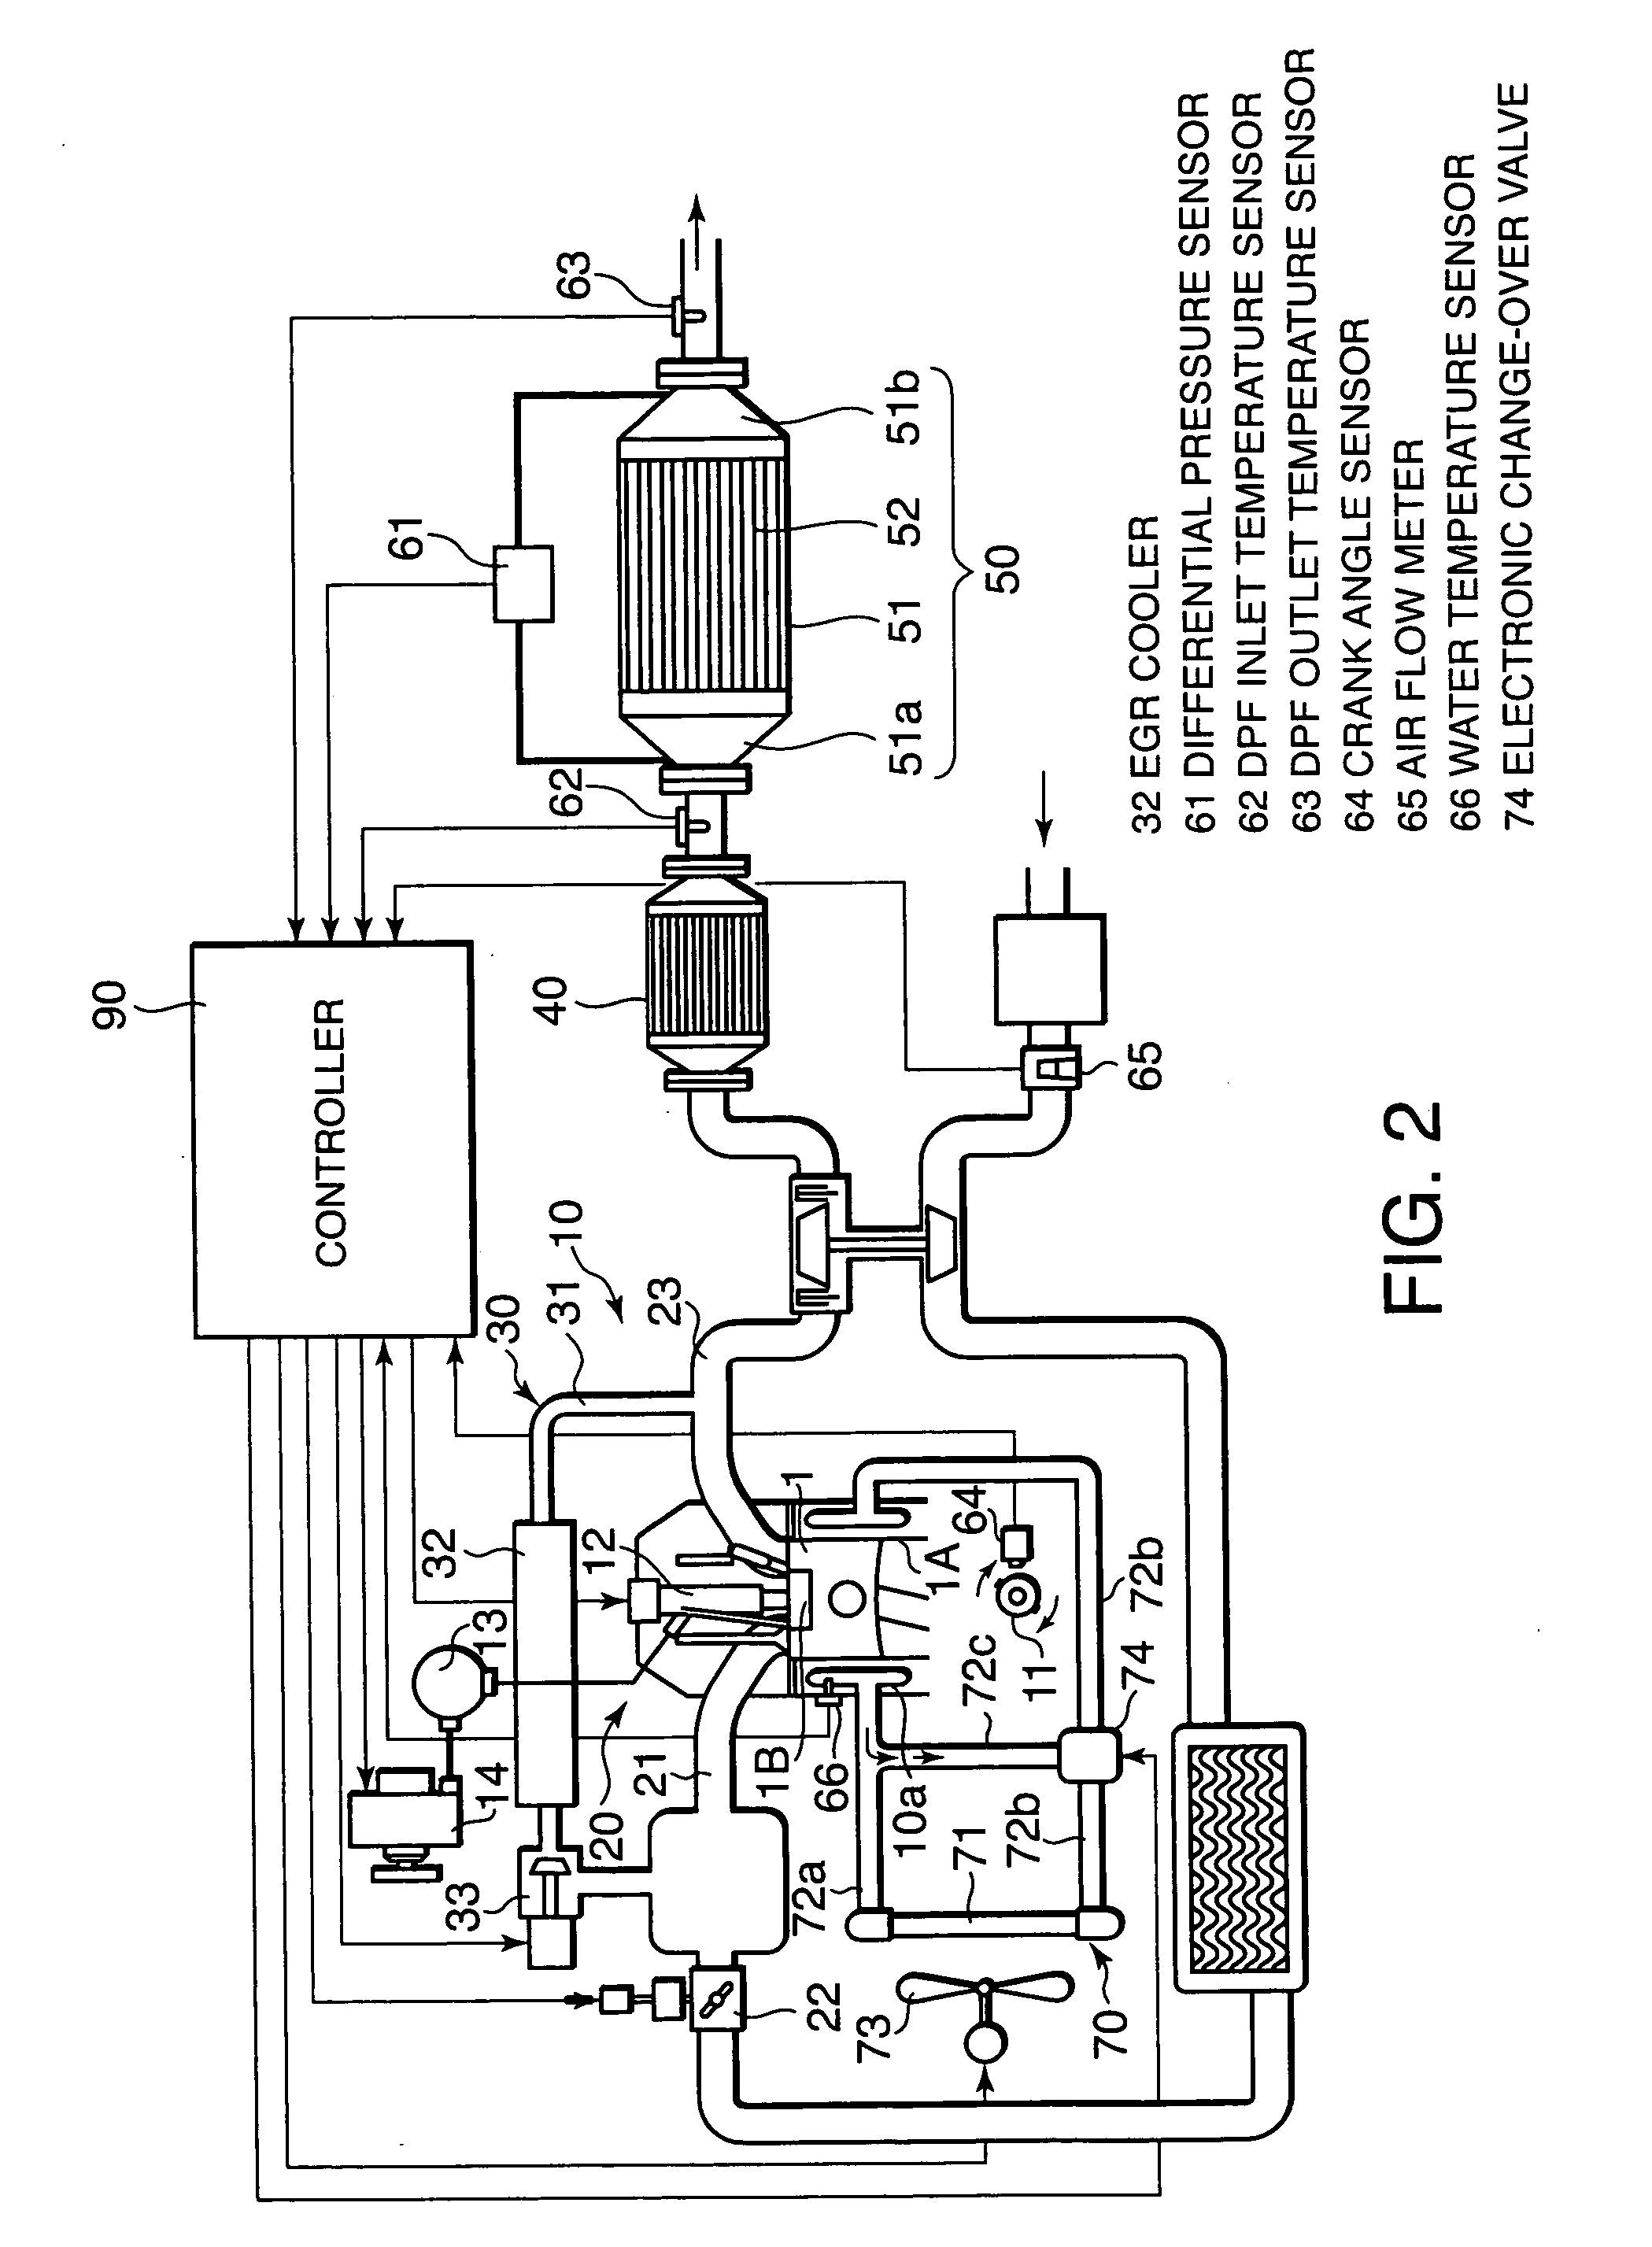 Diluted oil regeneration in internal combustion engine